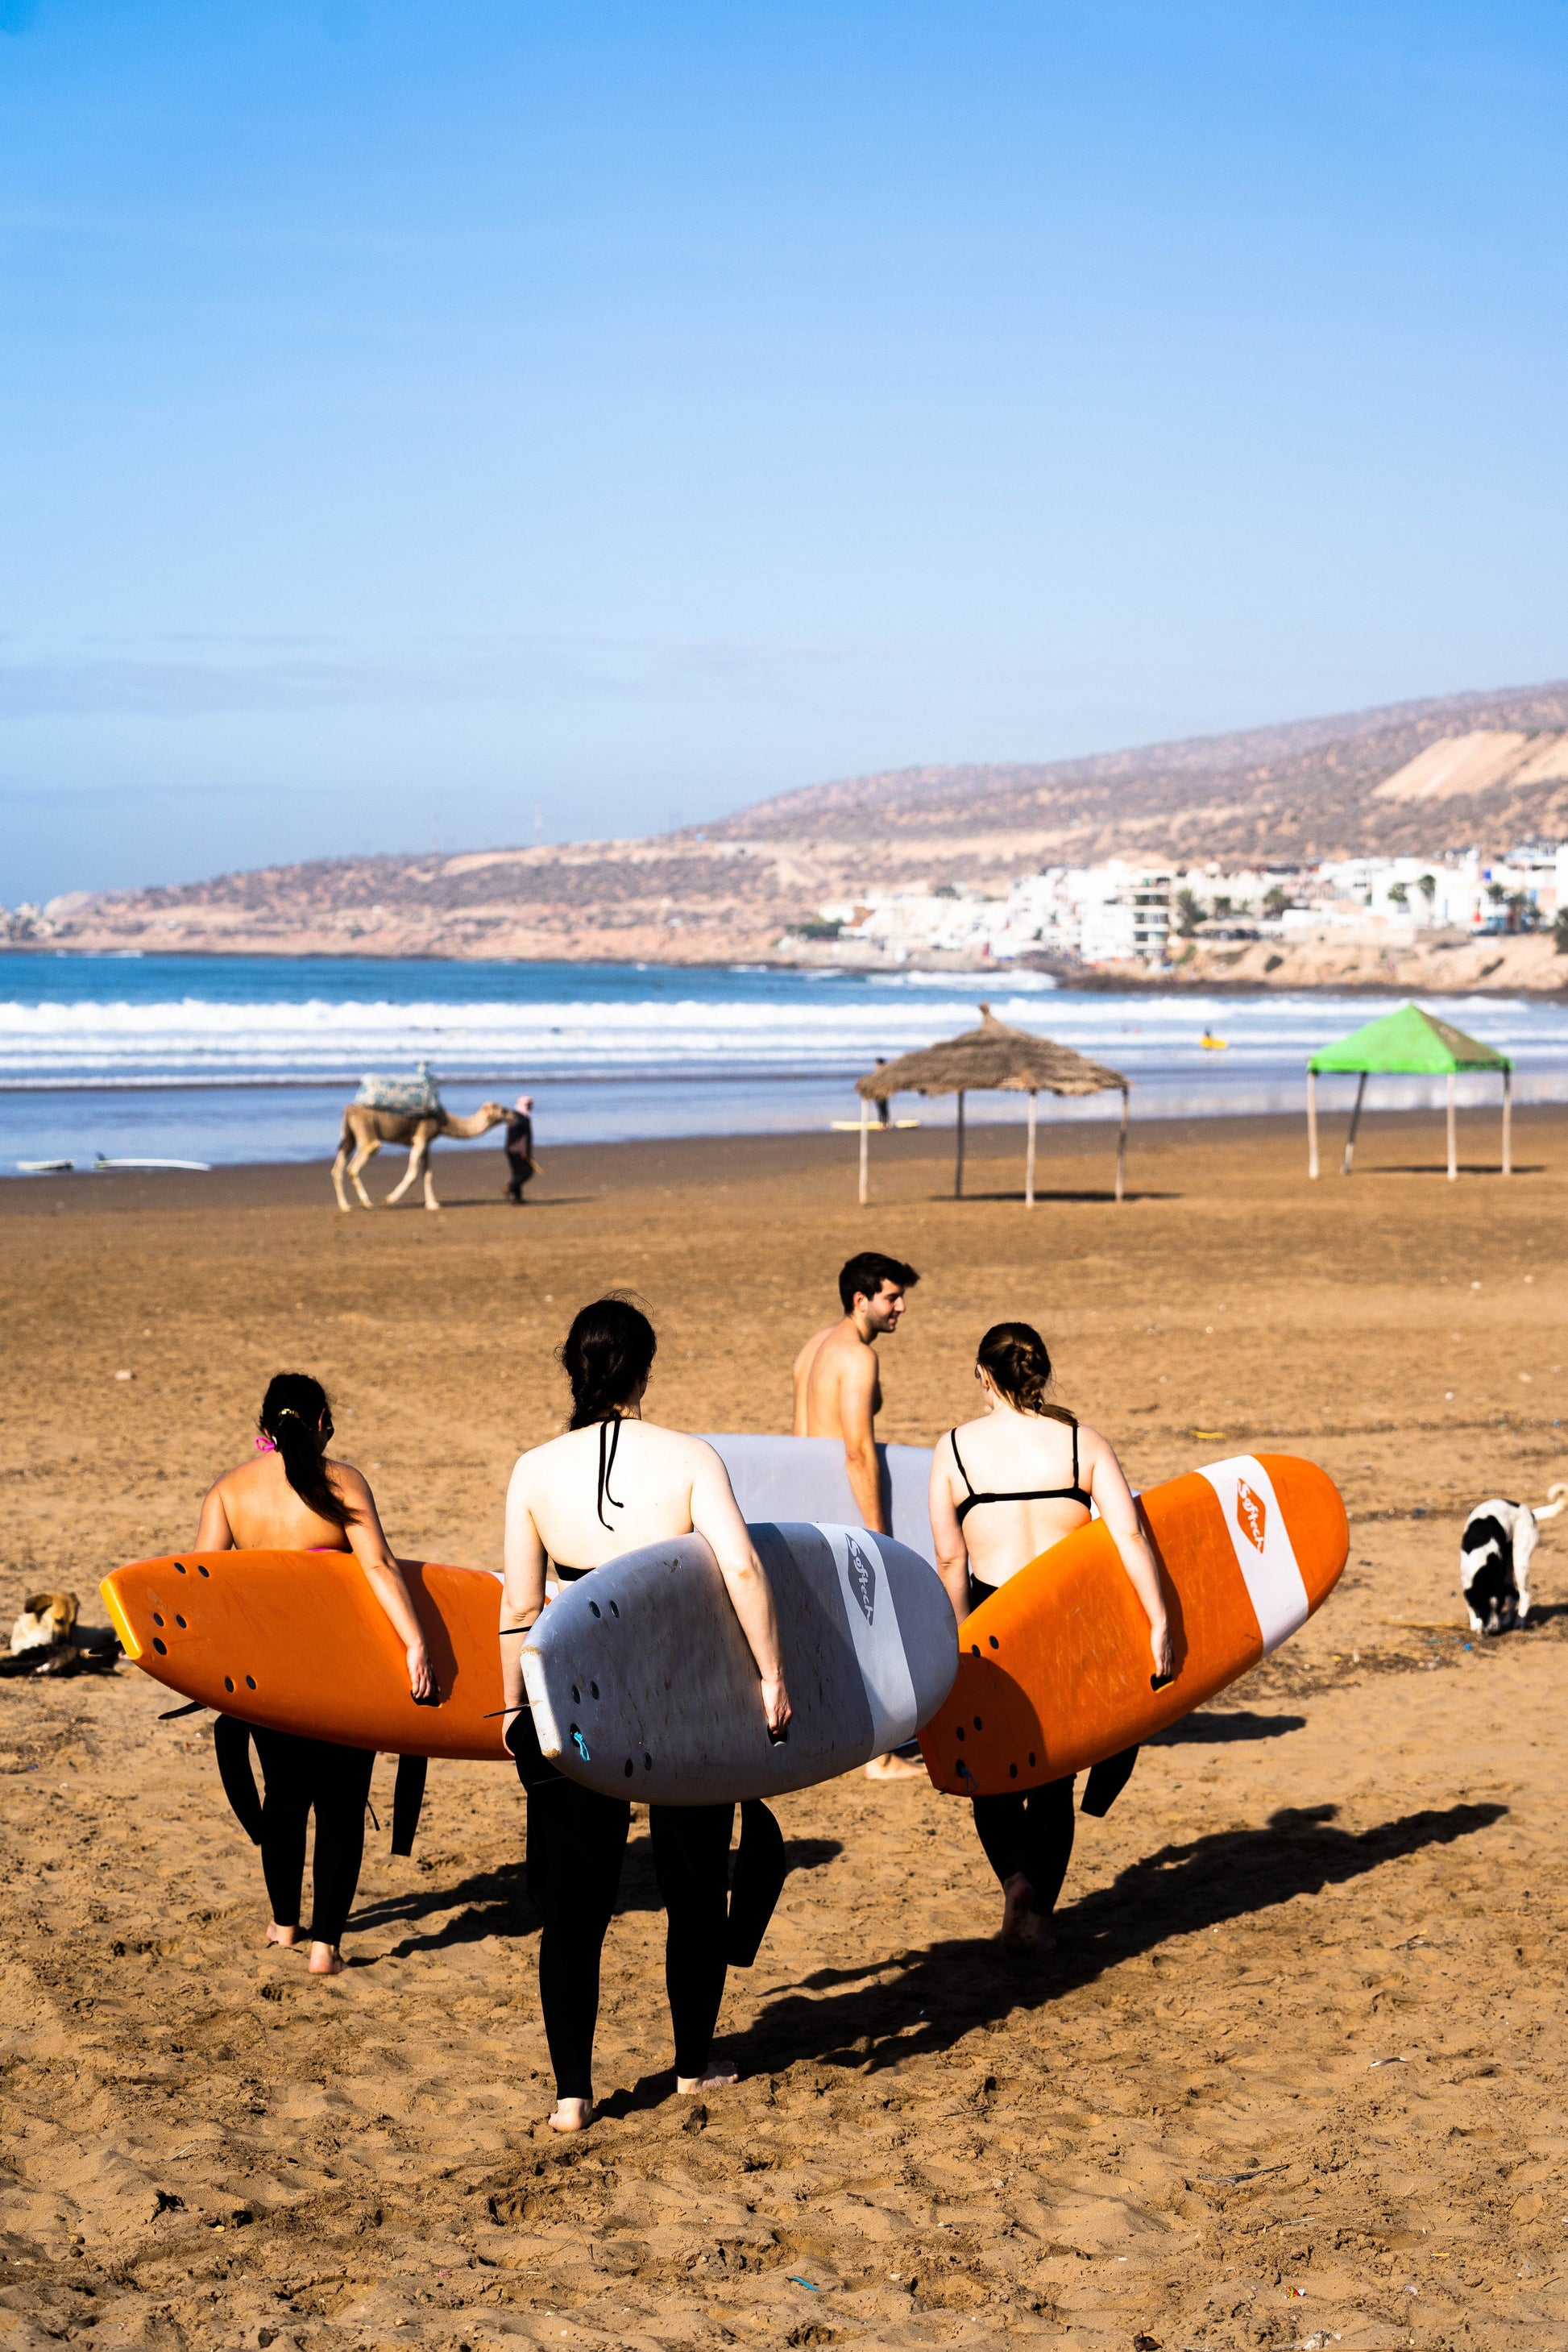 Group trip participants walking along the sand with their surf boards preparing for surf lessons in Morocco.